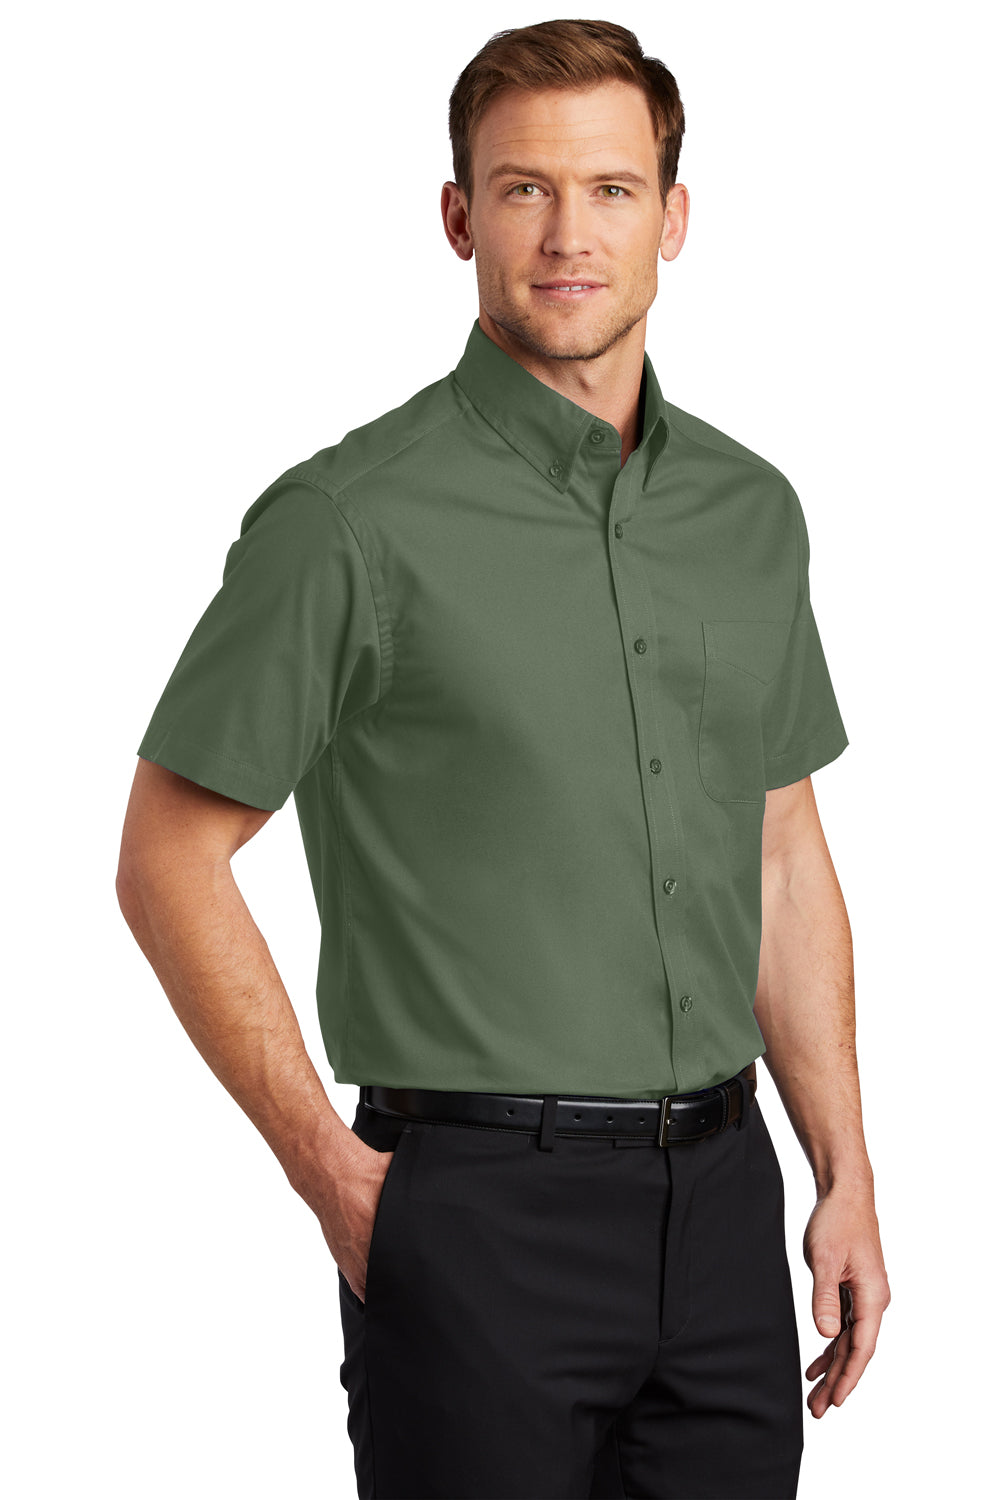 Port Authority S508/TLS508 Mens Easy Care Wrinkle Resistant Short Sleeve Button Down Shirt w/ Pocket Clover Green 3Q